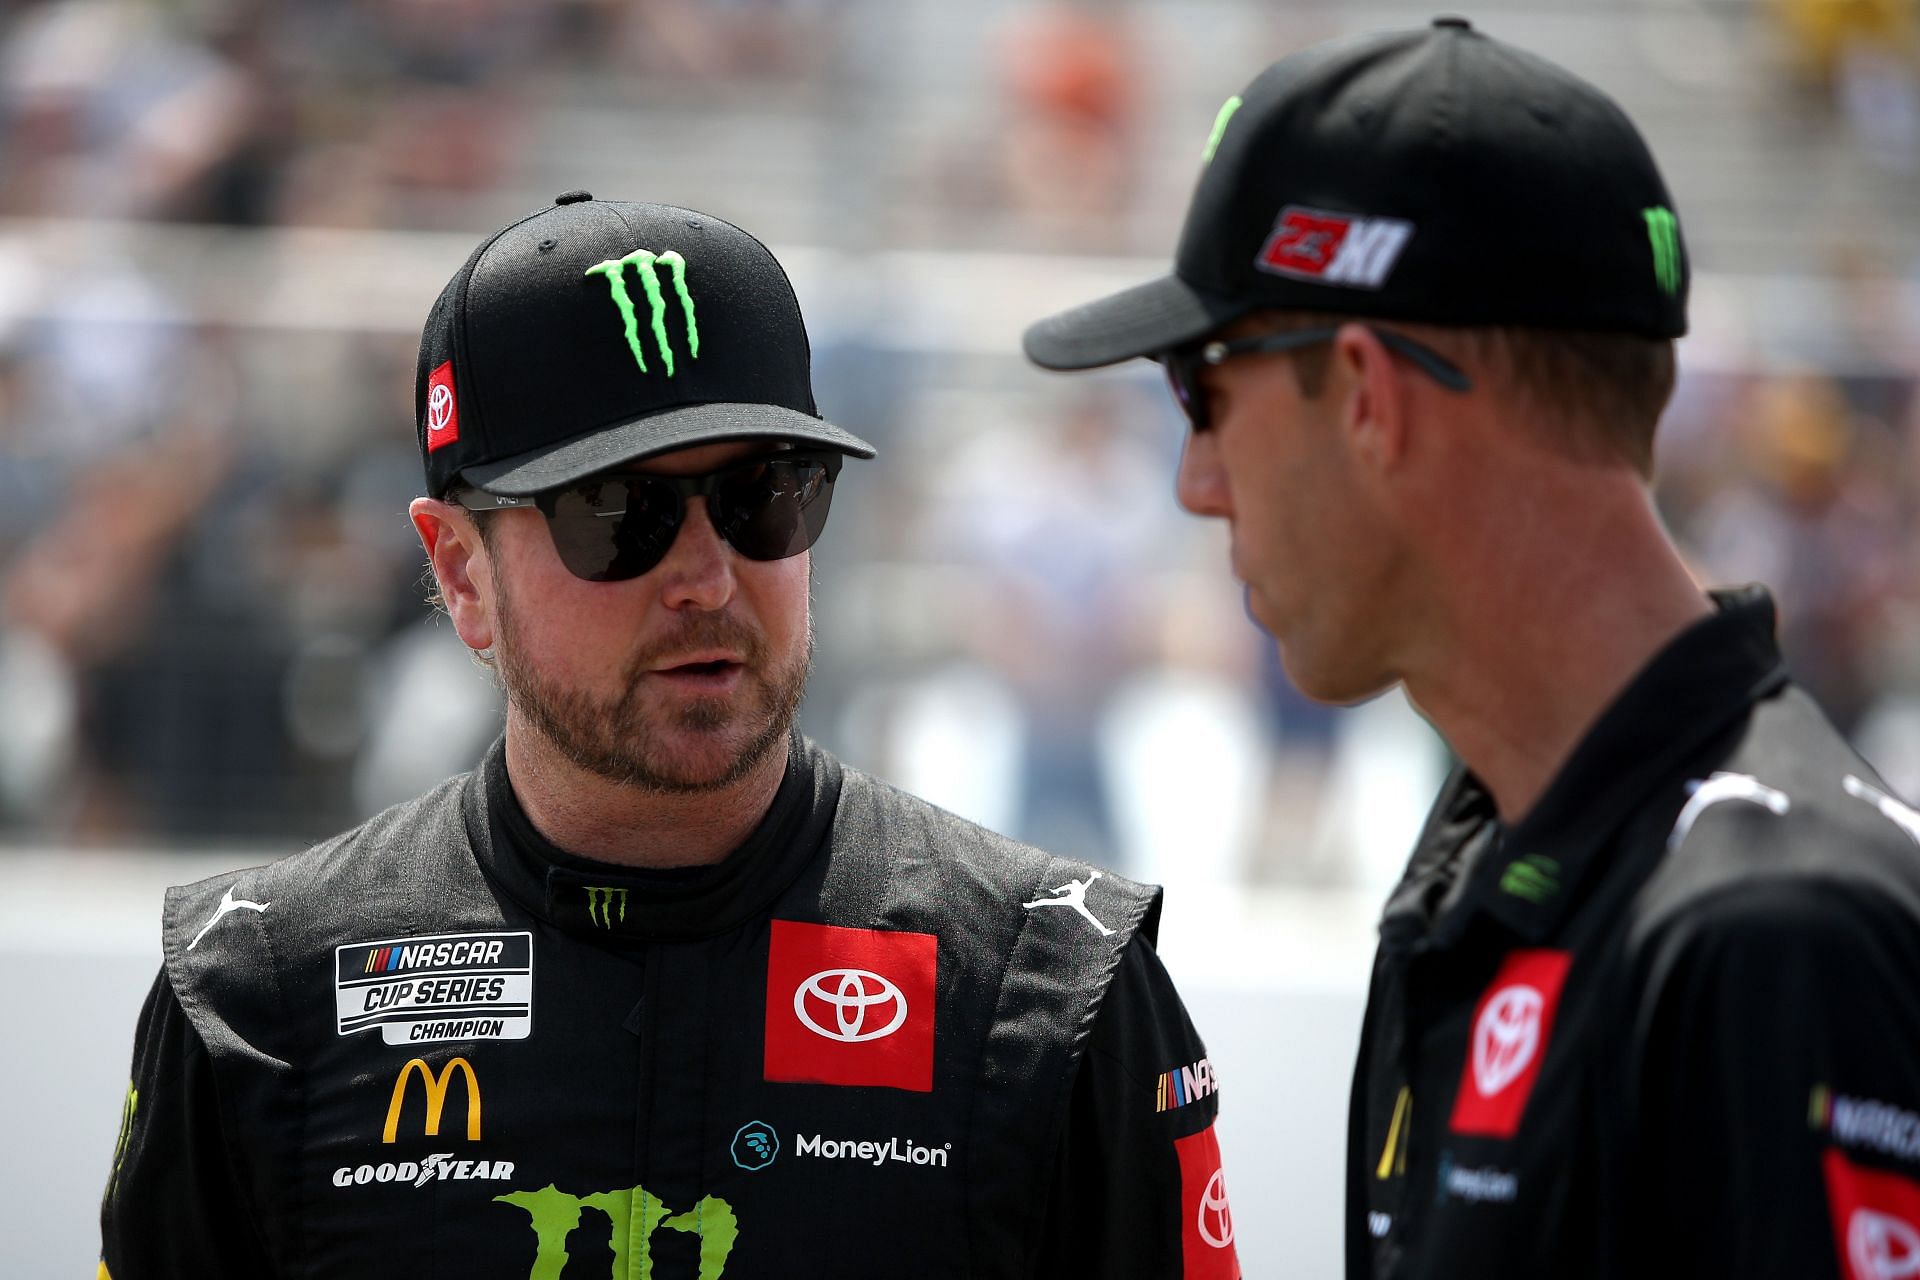 Kurt Busch speaks to a crew member on the grid prior to the NASCAR Cup Series Enjoy Illinois 300 at WWT Raceway (Photo by Sean Gardner/Getty Images)